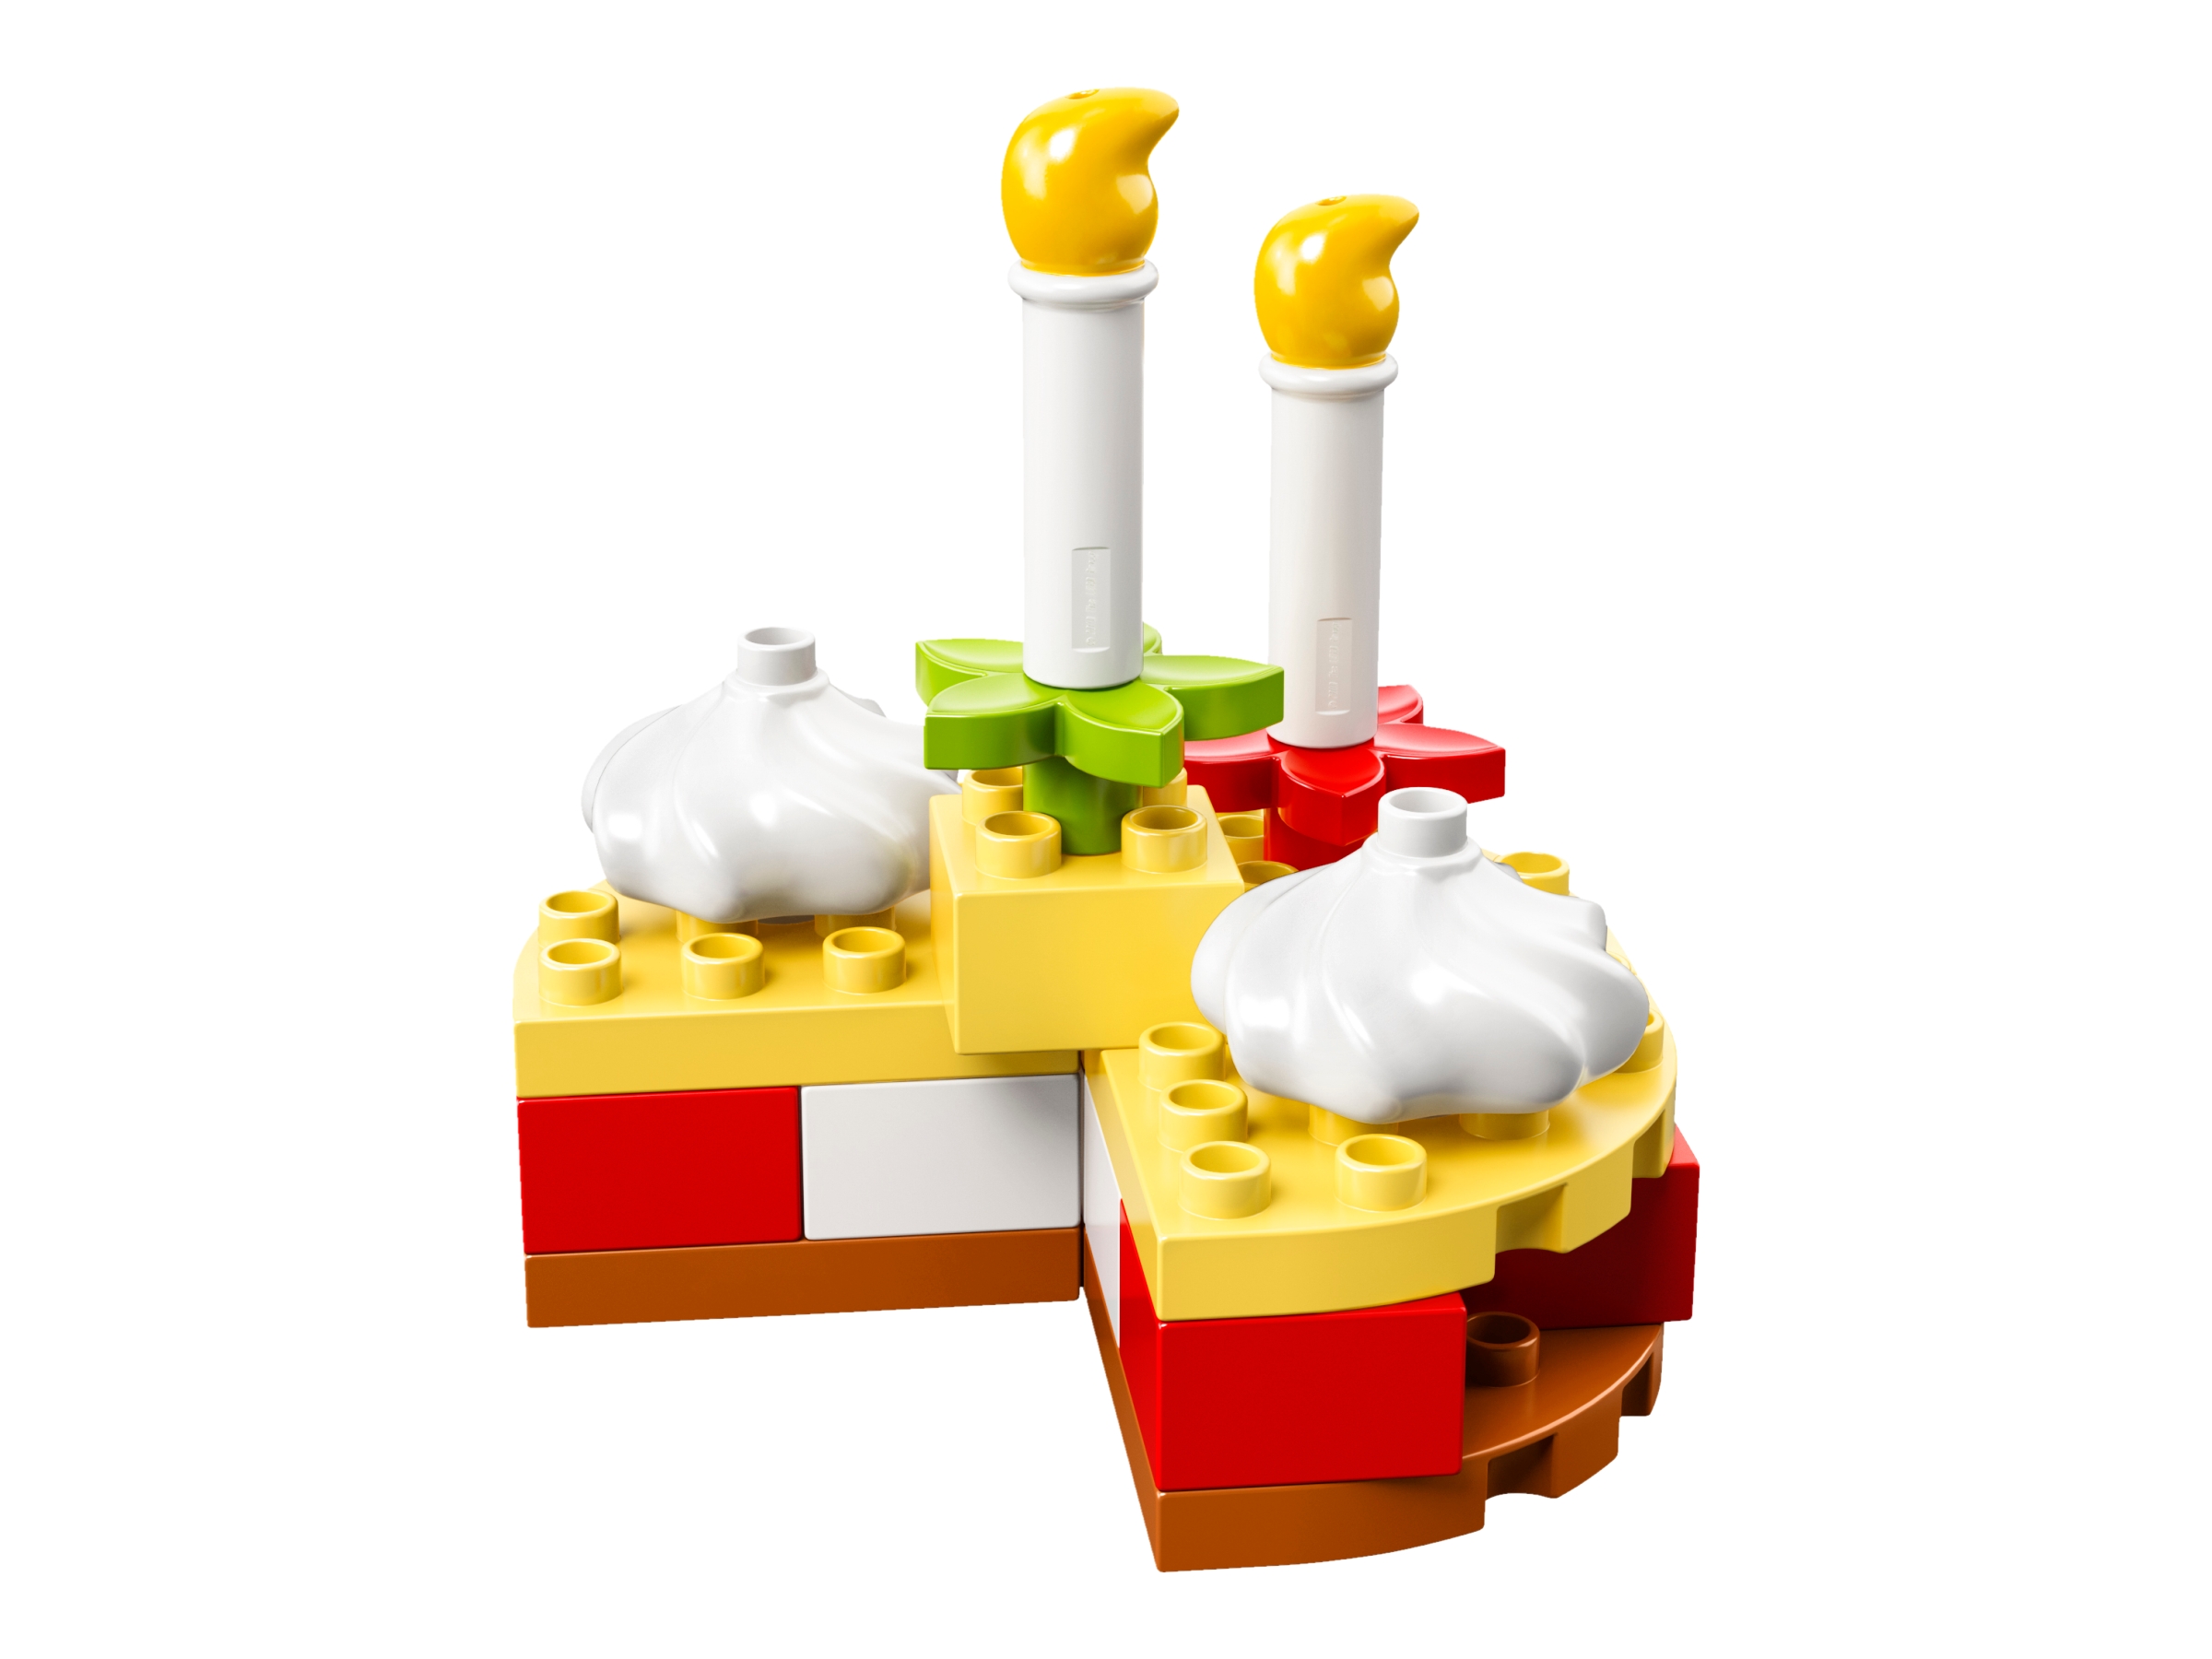 My First Celebration 10862 | DUPLO® | Buy online at the Official